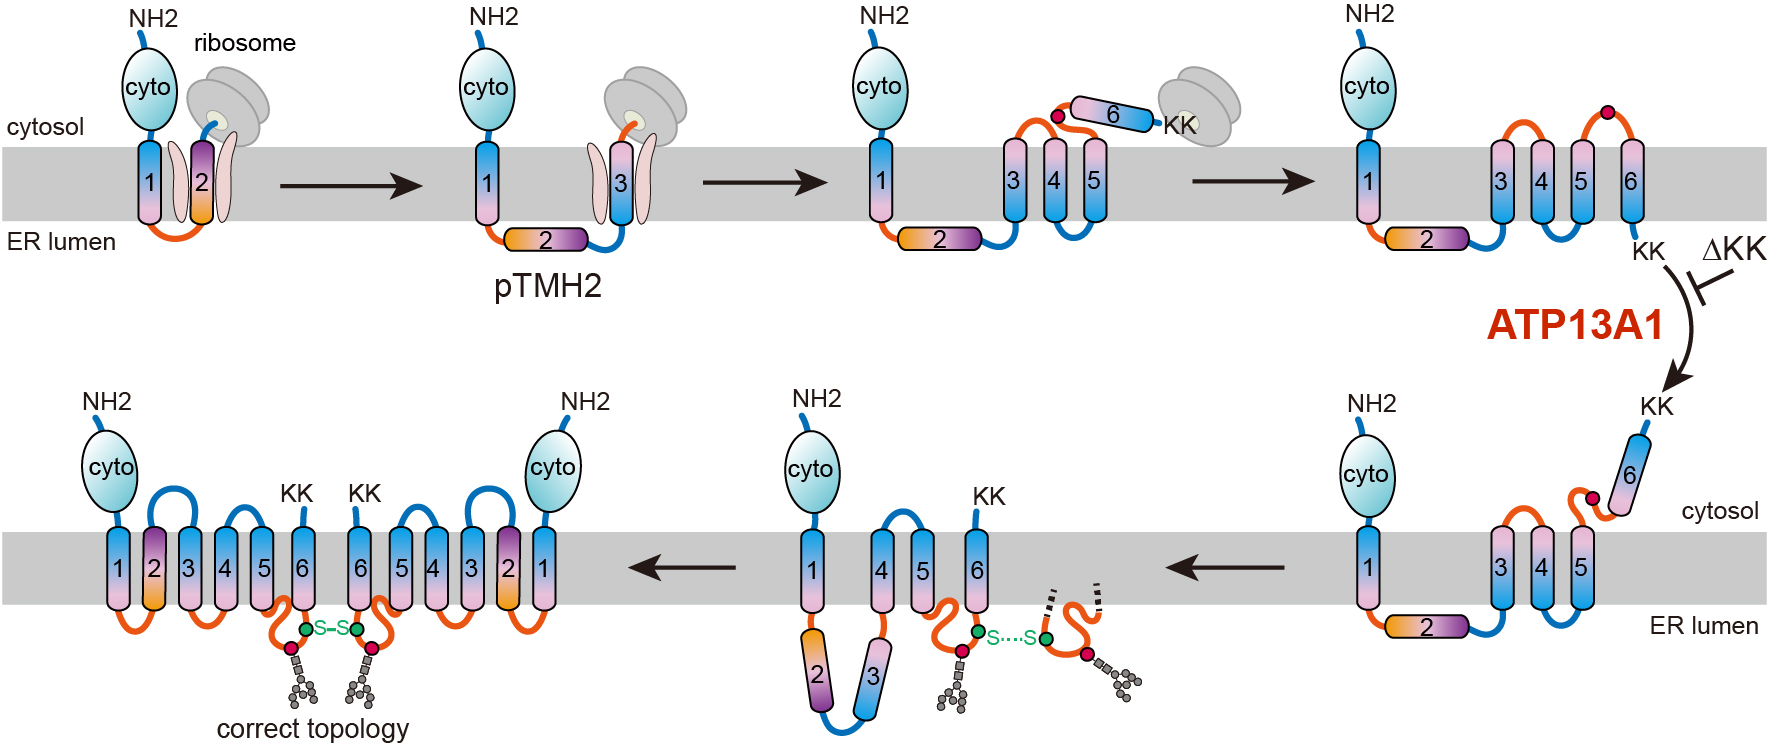 Schematic representation of the ABCG2 topogenesis pathway assisted by ATP13A1